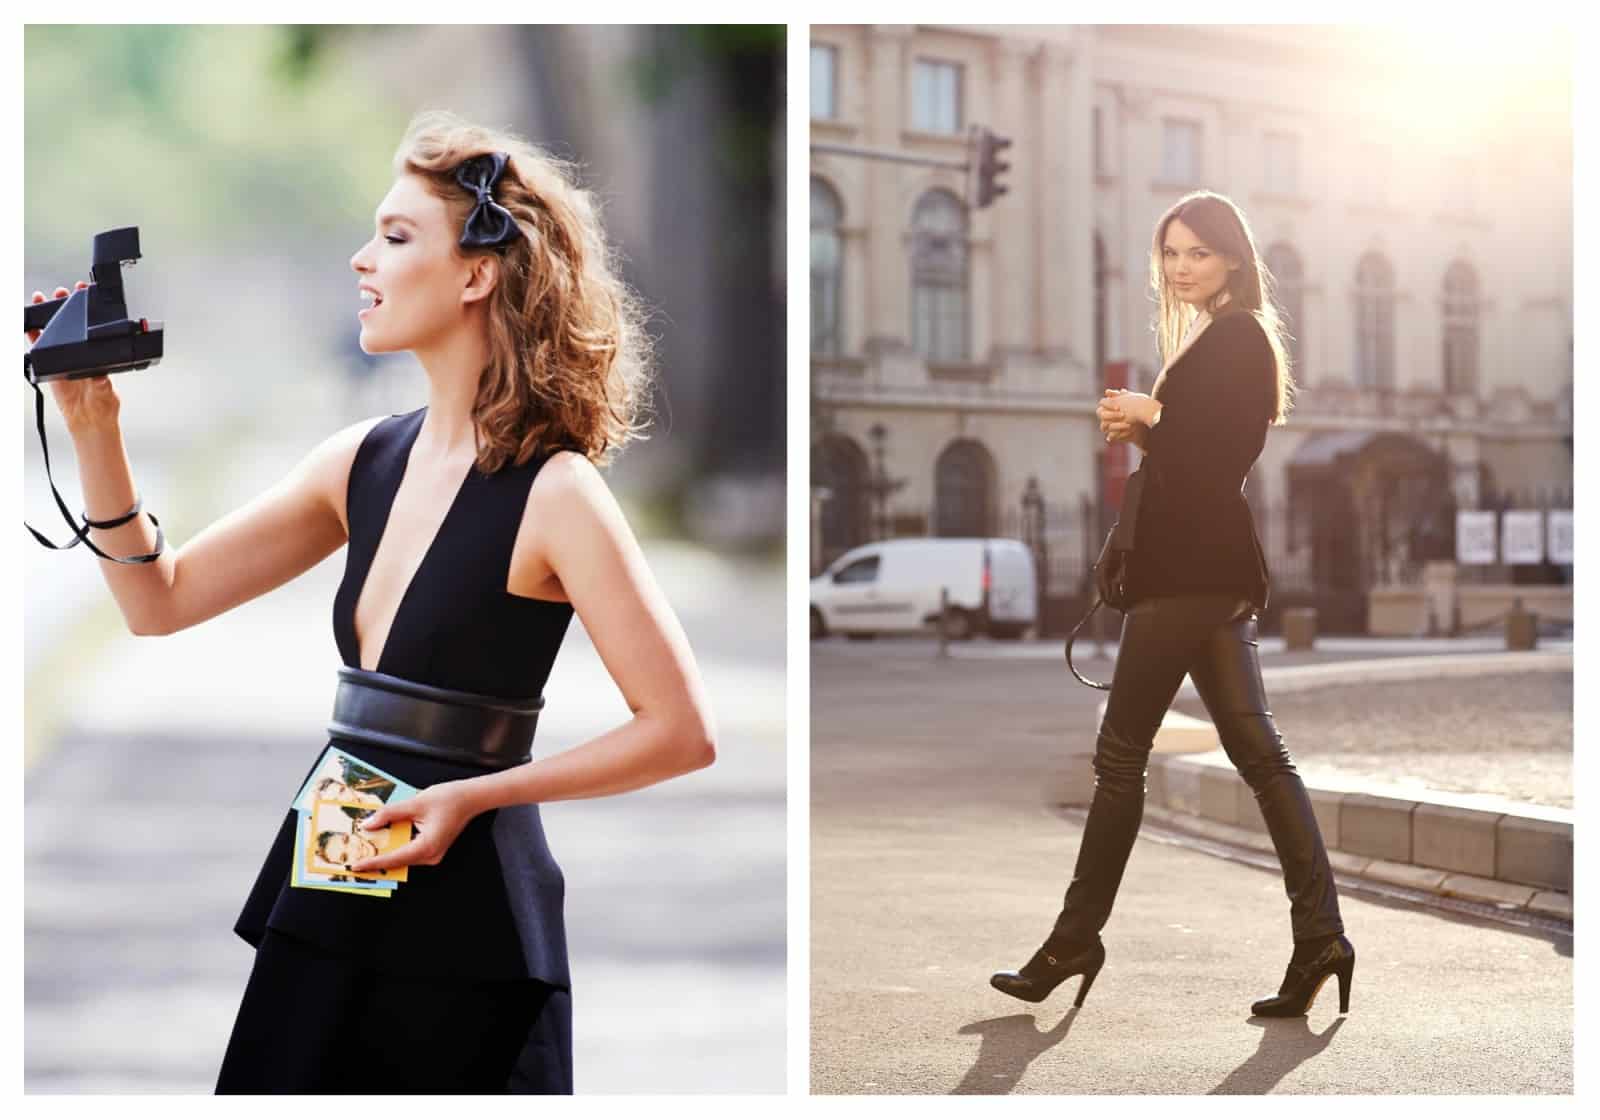 French Chic is all about decoding the Secrets of Paris Fashion, like this Parisian woman who wears a daring low-cut dress and who's taking a polaroid selfie (left). Or this Parisian woman who wears leather pants with high heels and conservative cardigan (right).